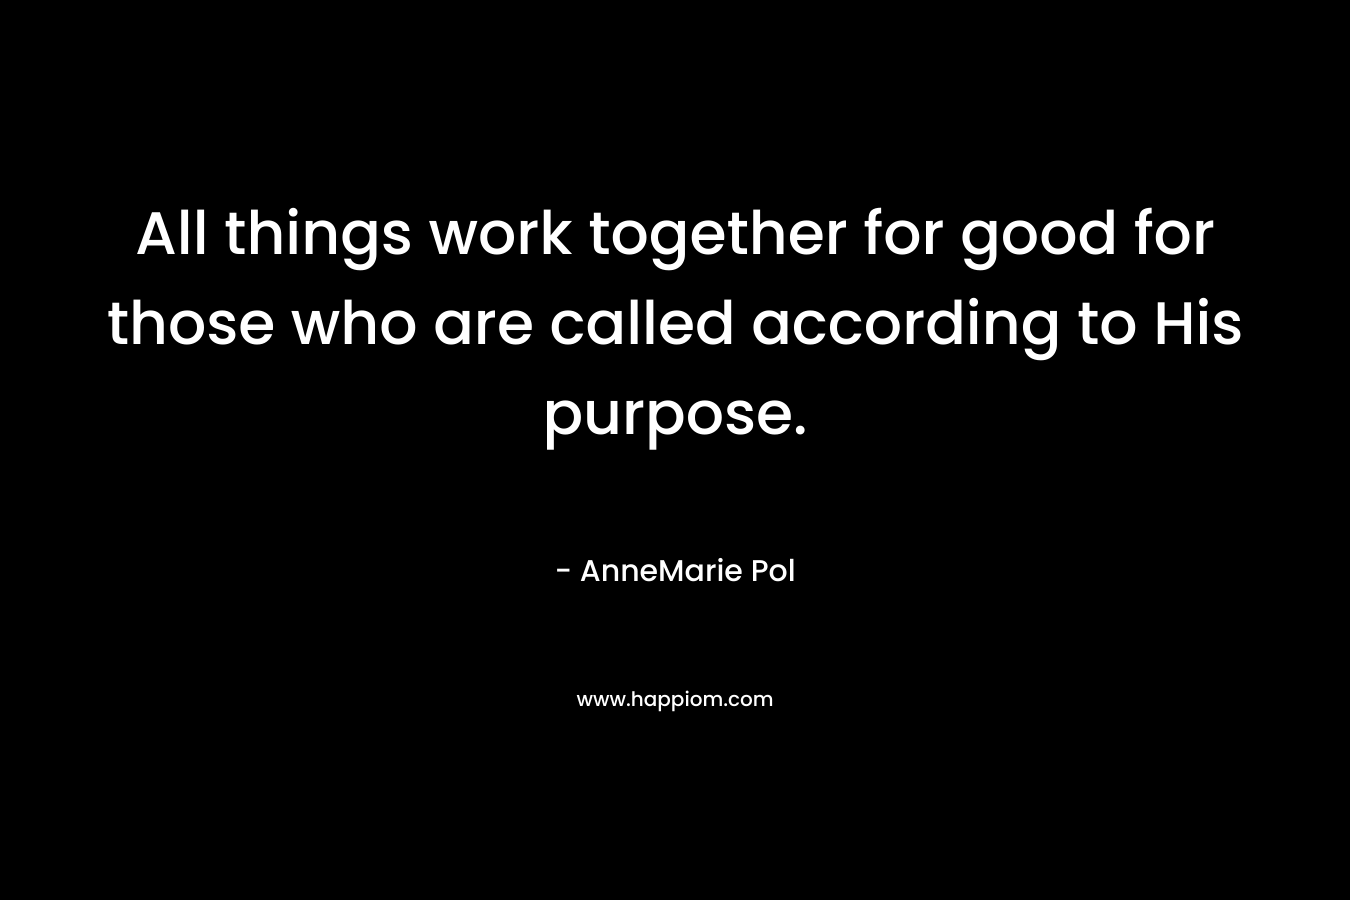 All things work together for good for those who are called according to His purpose.